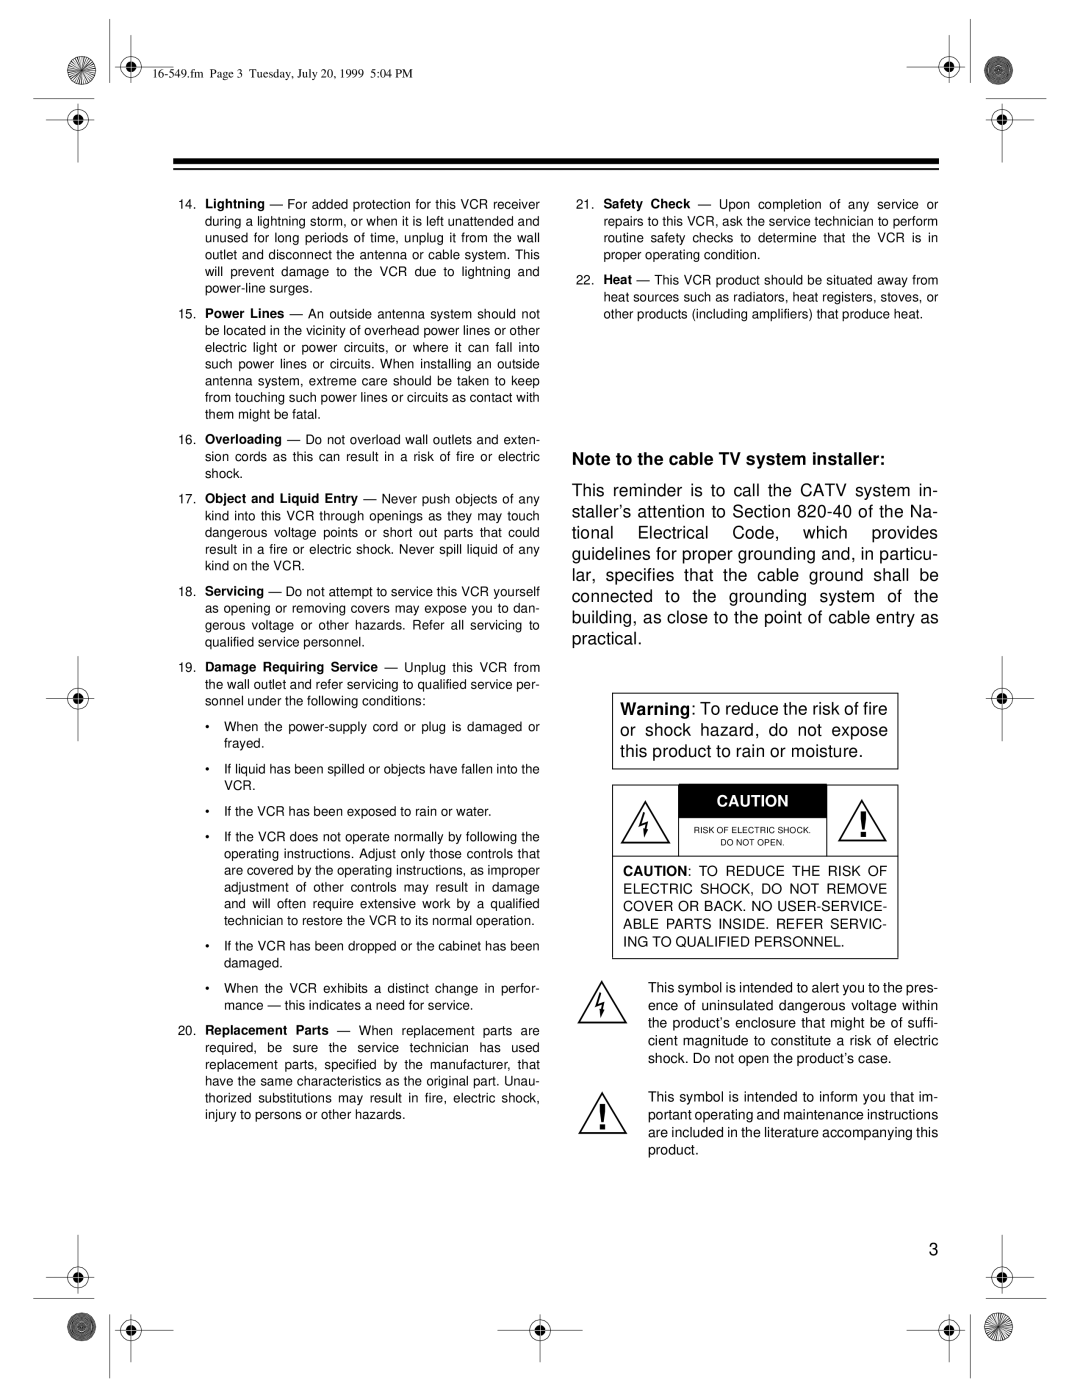 Radio Shack 112 (16-549), 62 (16-632), 113 (16-550) owner manual Fm Page 3 Tuesday, July 20, 1999 504 PM 